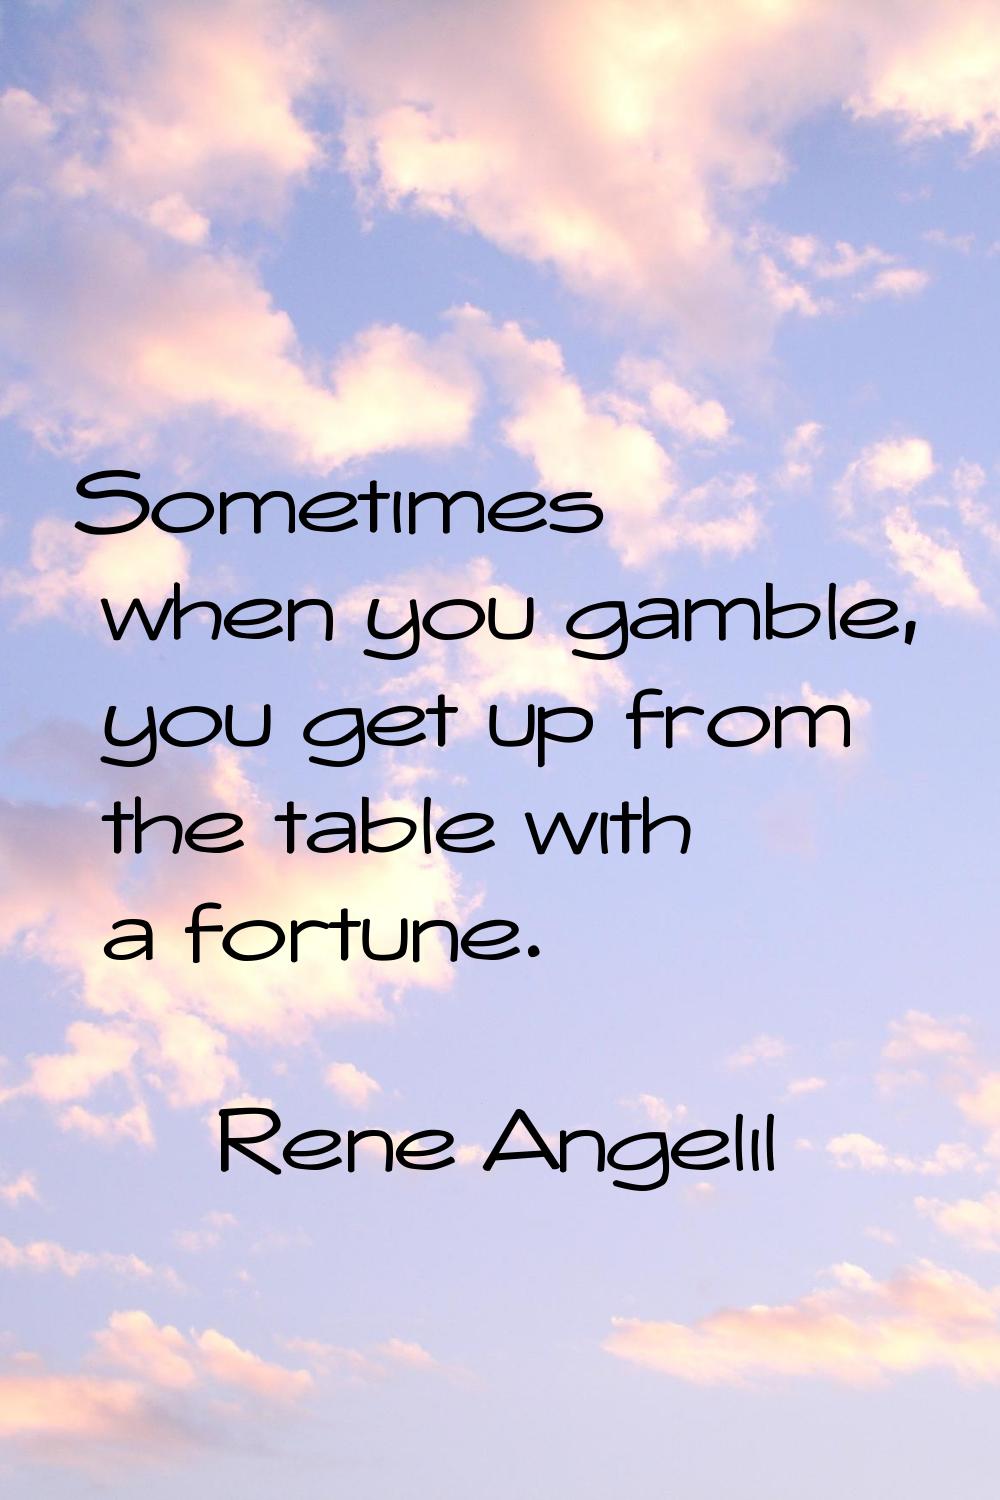 Sometimes when you gamble, you get up from the table with a fortune.